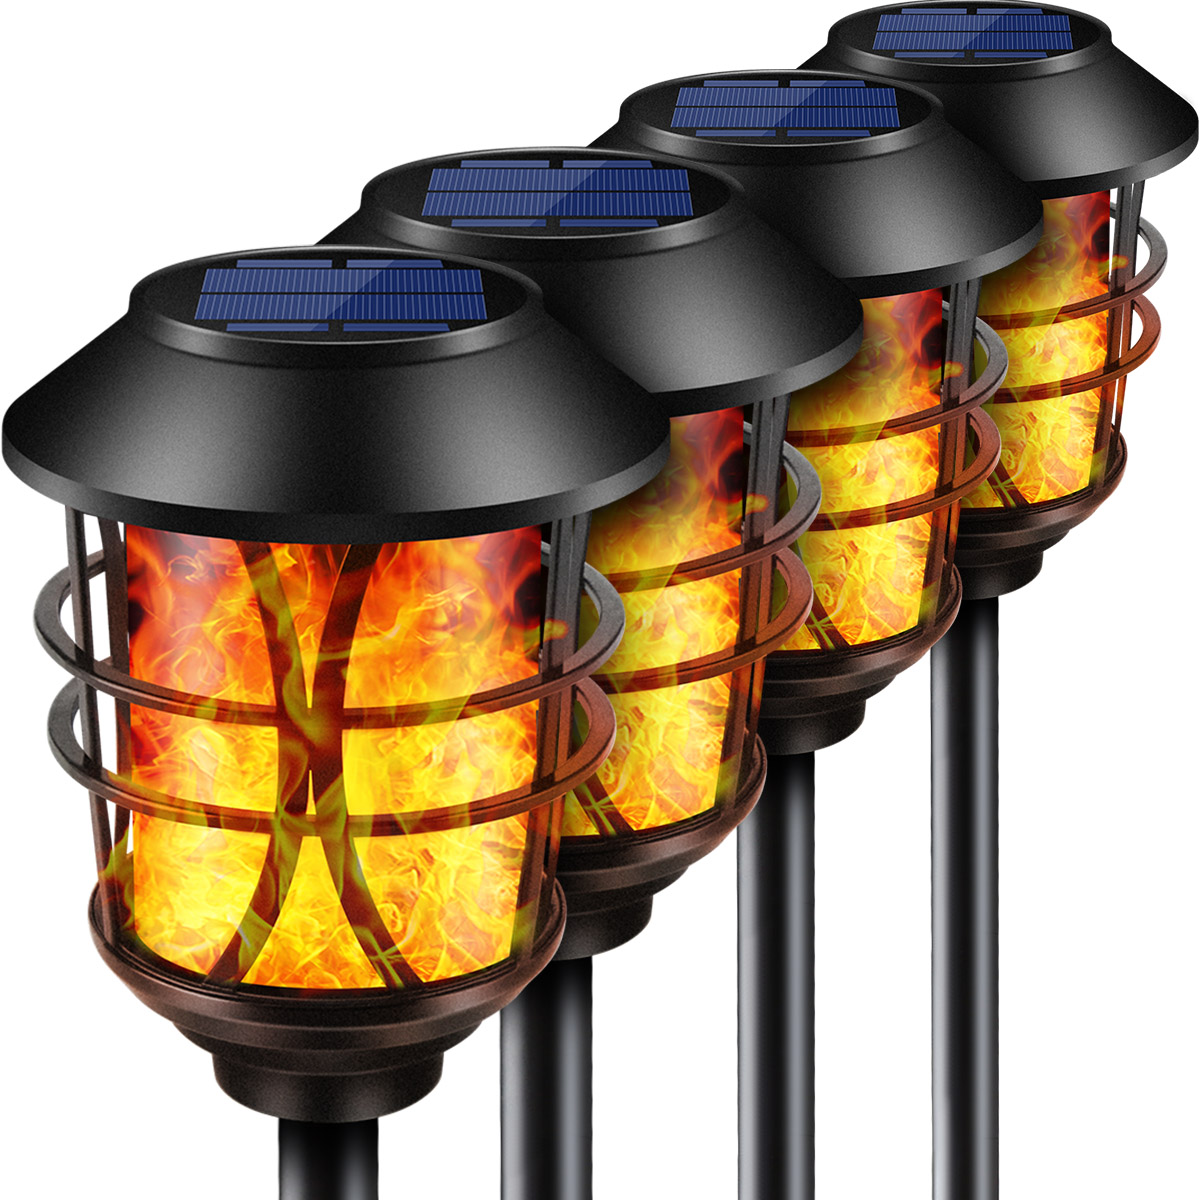 TomCare Solar Lights Metal Flickering Flame Solar Torches Lights Waterproof Outdoor Heavy Duty Lighting Solar Pathway Lights Landscape Lighting Dusk to Dawn Auto On/Off for Garden Patio Yard, 4 Pack